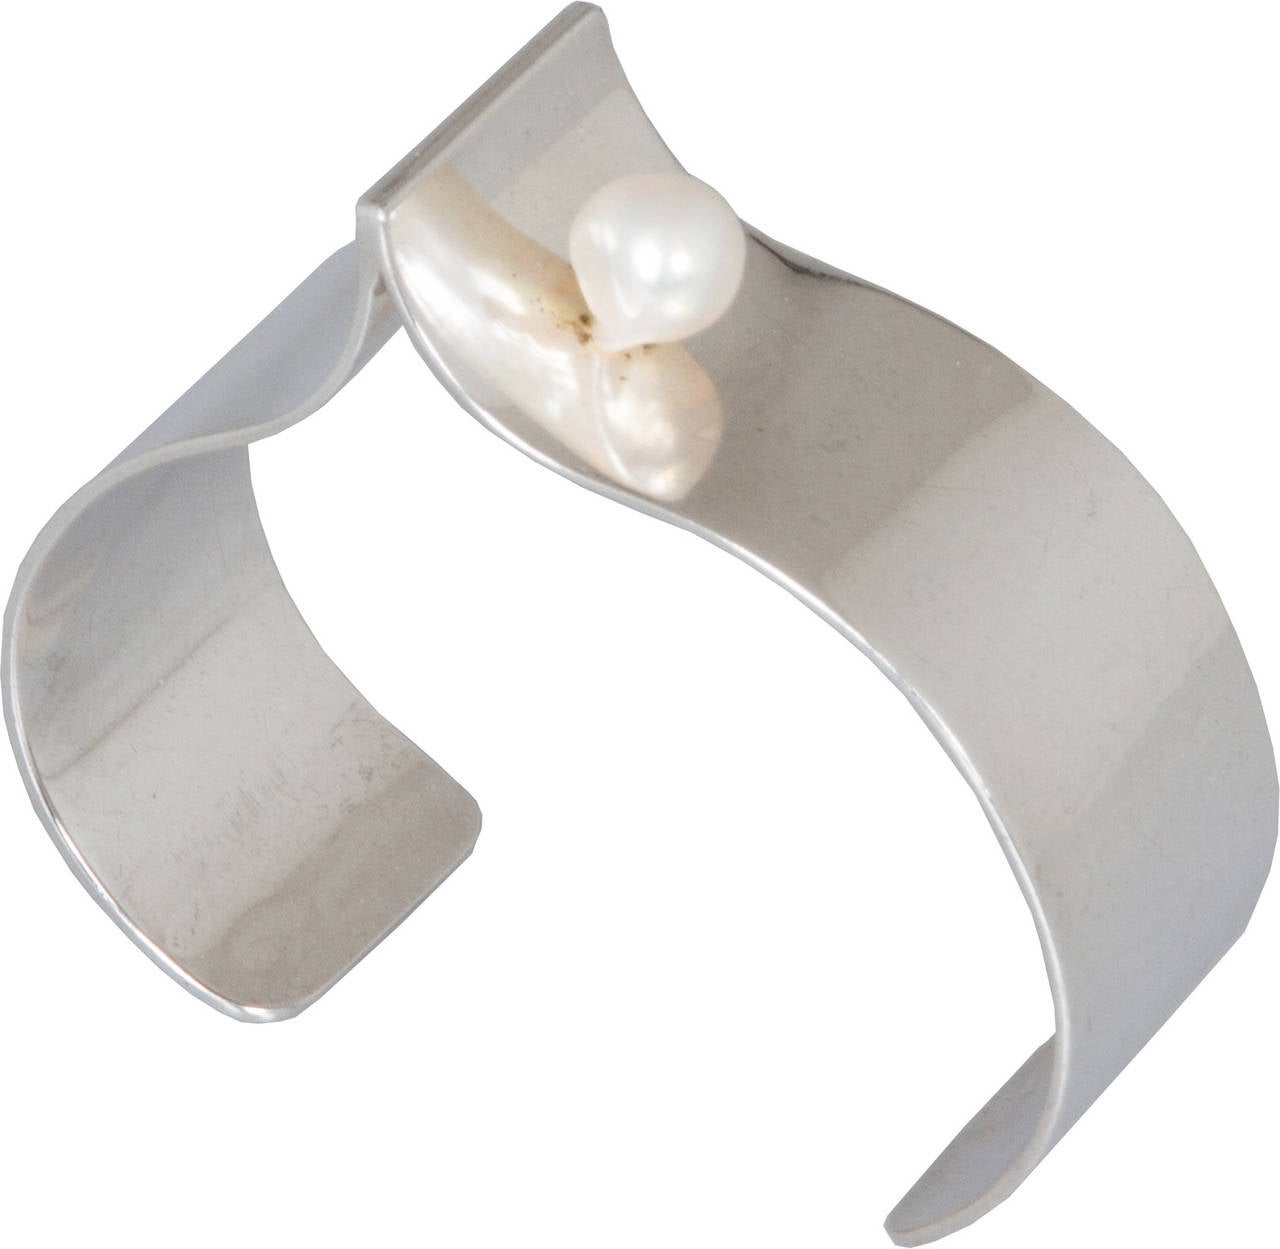 Modernist Sterling Silver and Pearl Cuff by Bill and Patsy Roach